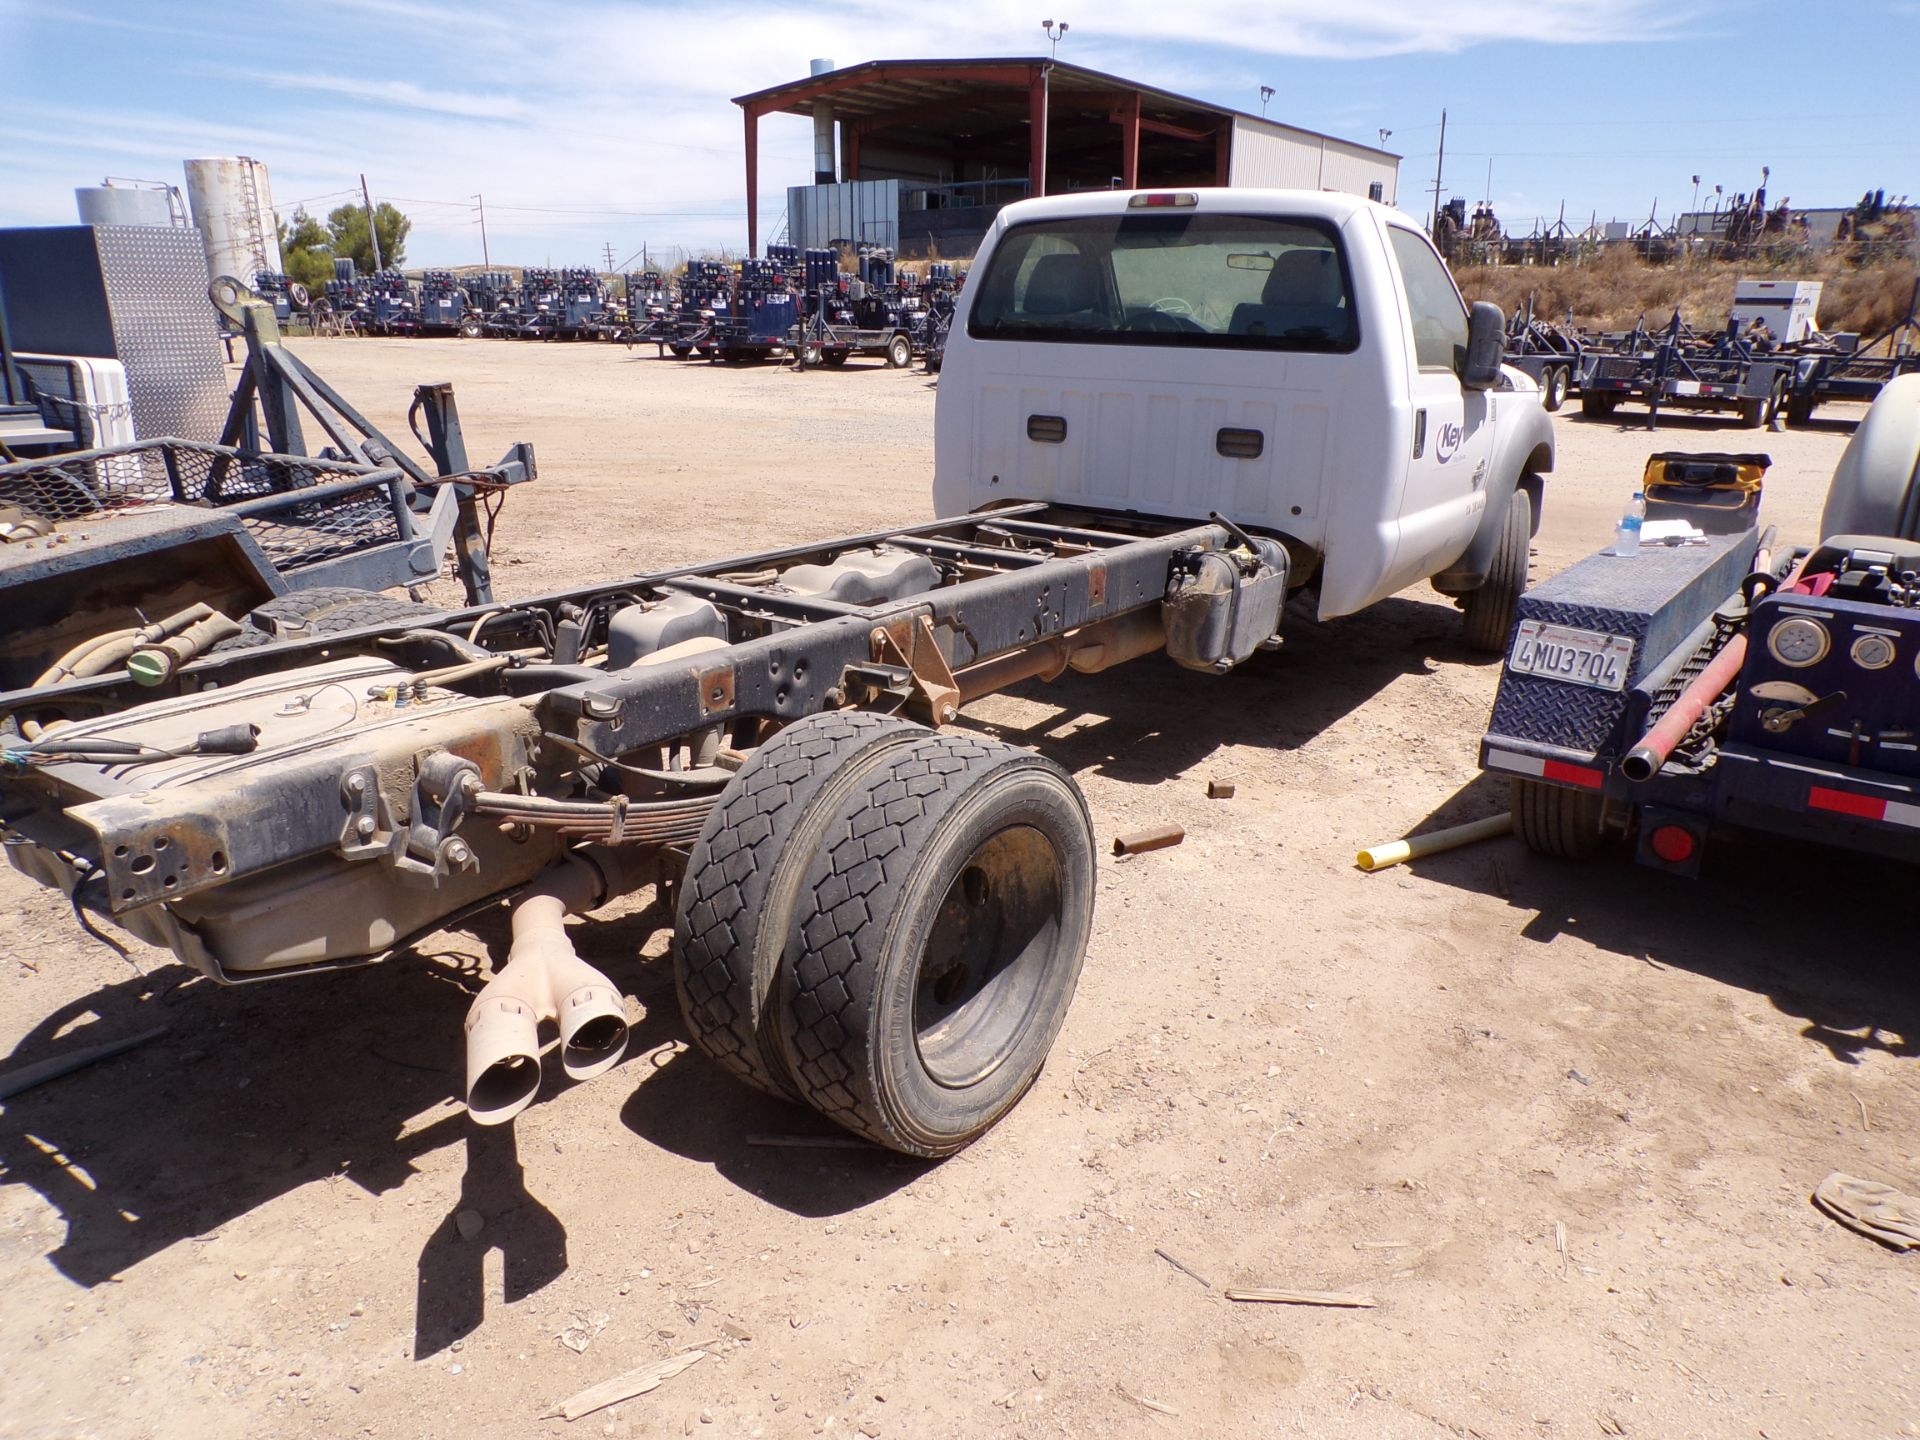 Located in YARD 14 - Bakersfield, CA (1418597) (X) 2012 FORD F450 3X4 STANDARD CAB PICKUP, VIN- - Image 5 of 6